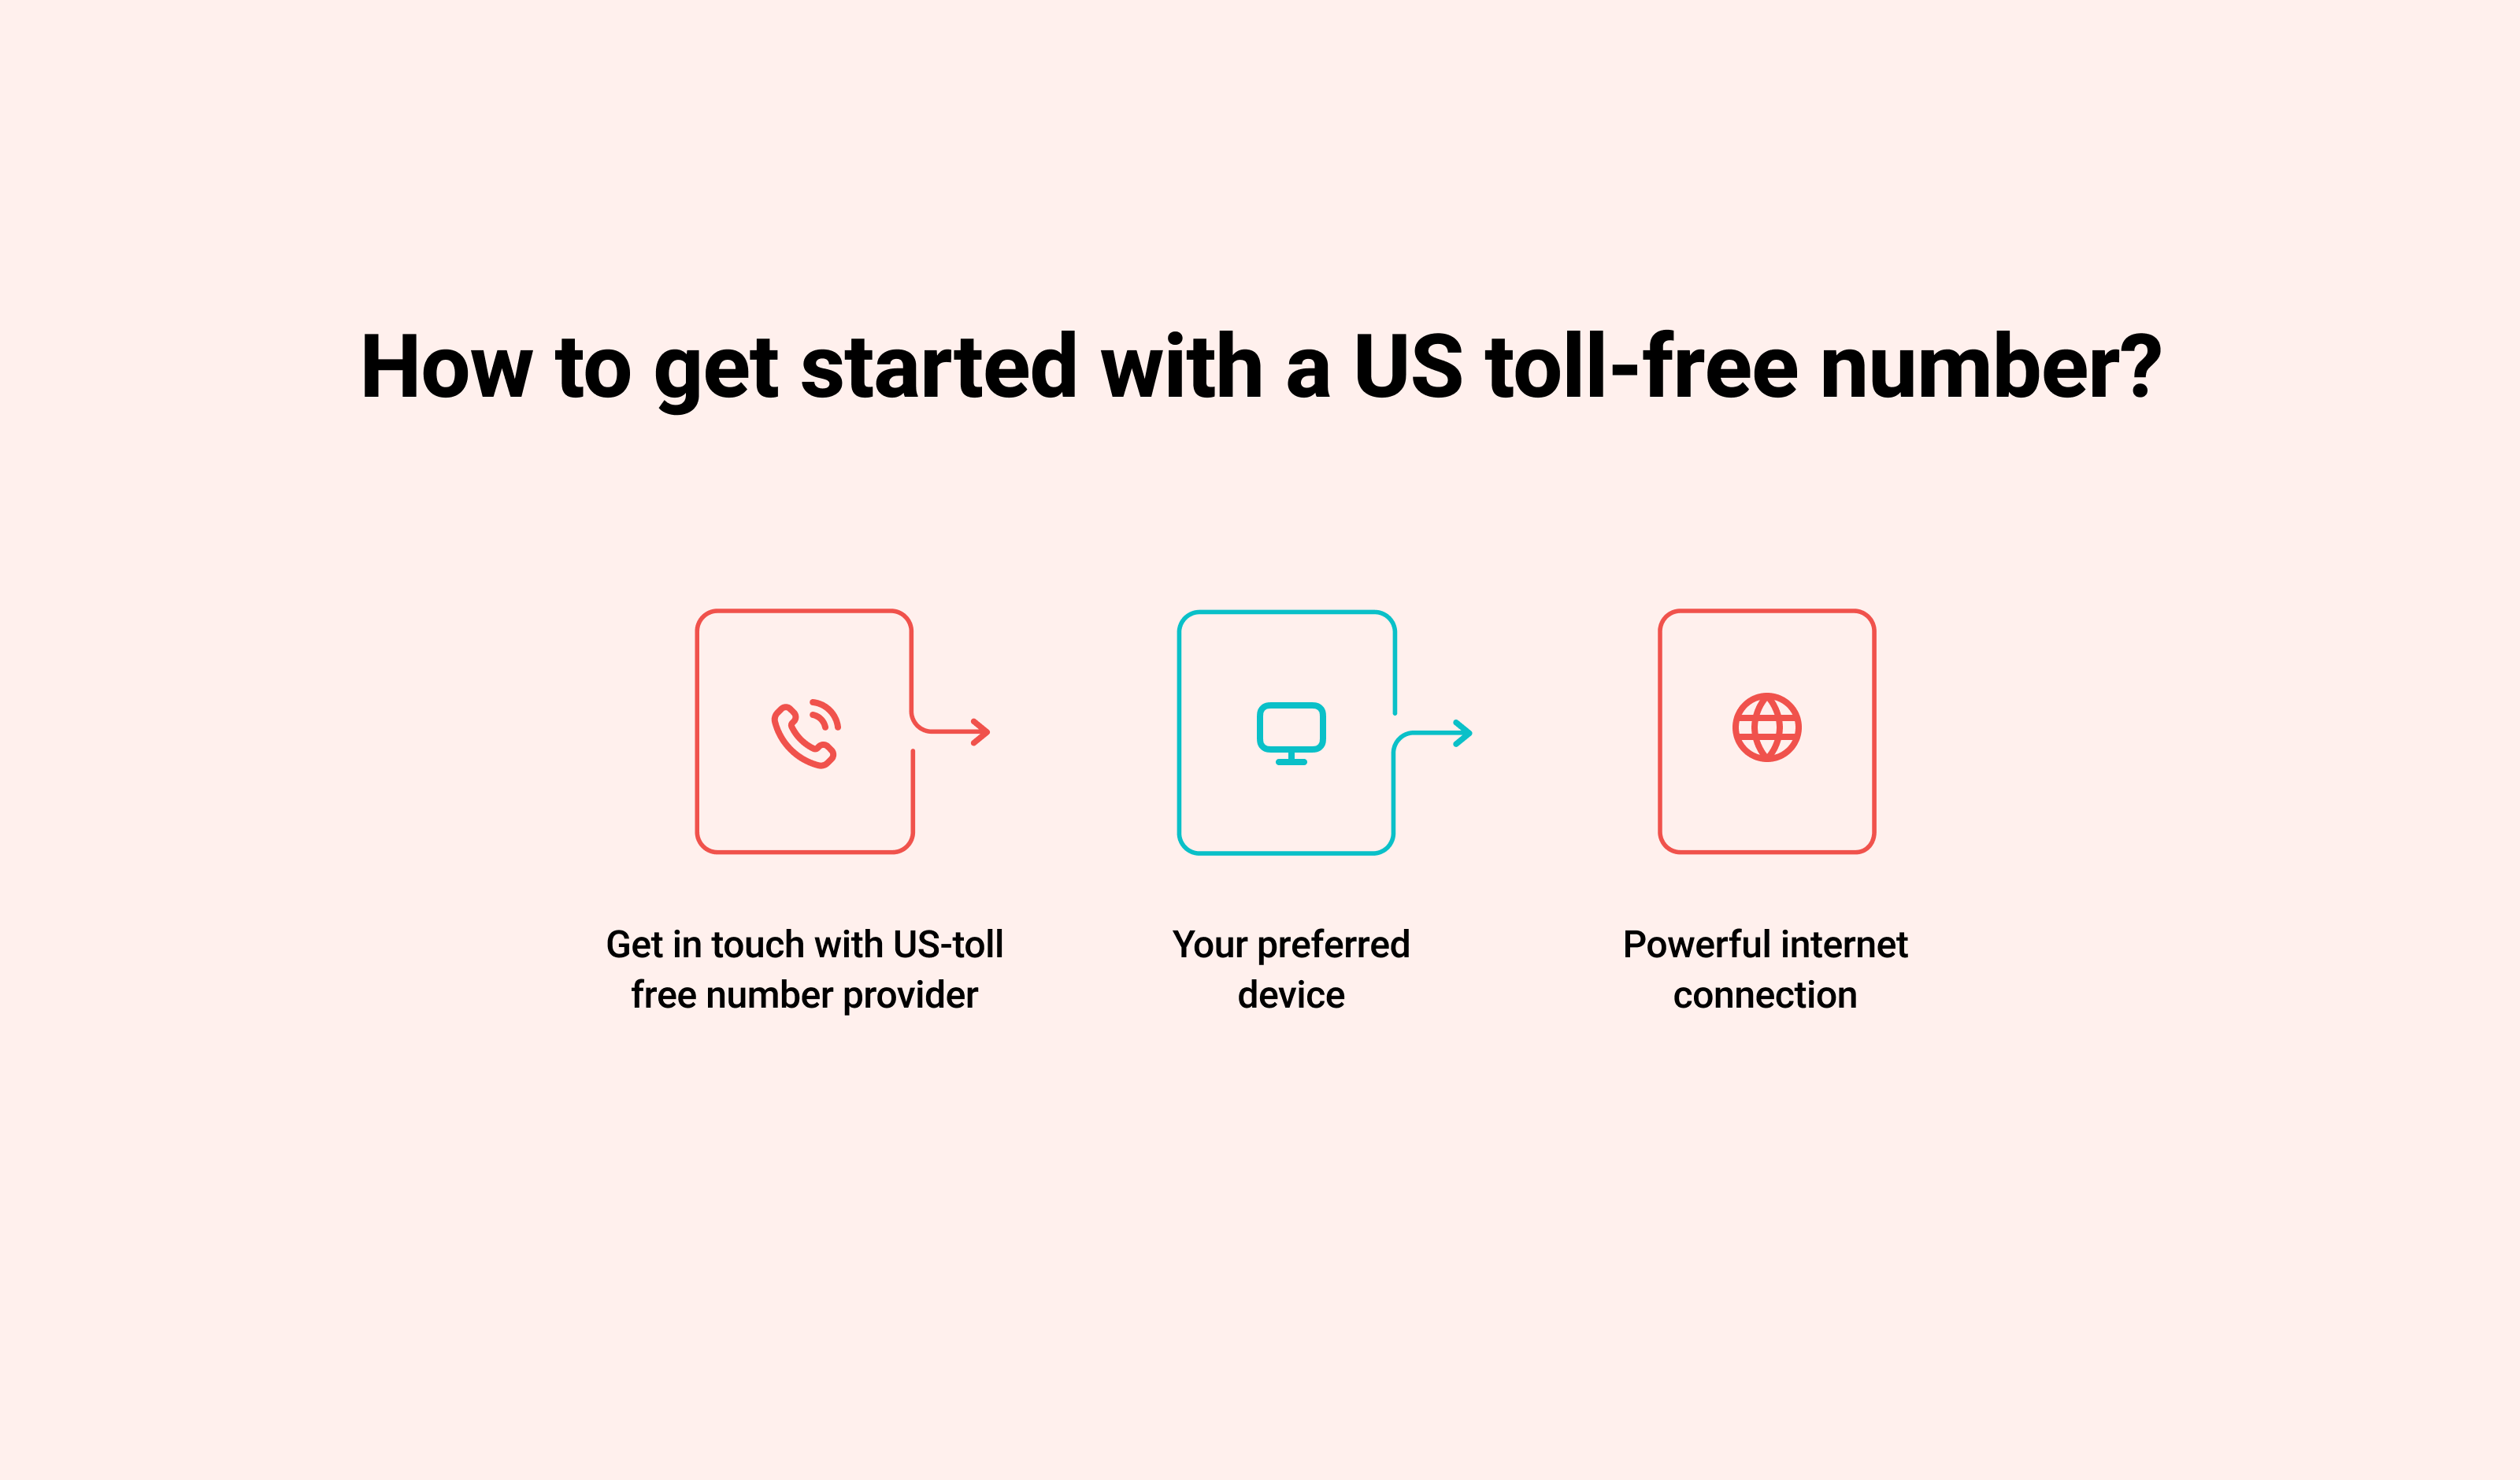 How to get started with a US toll-free number?